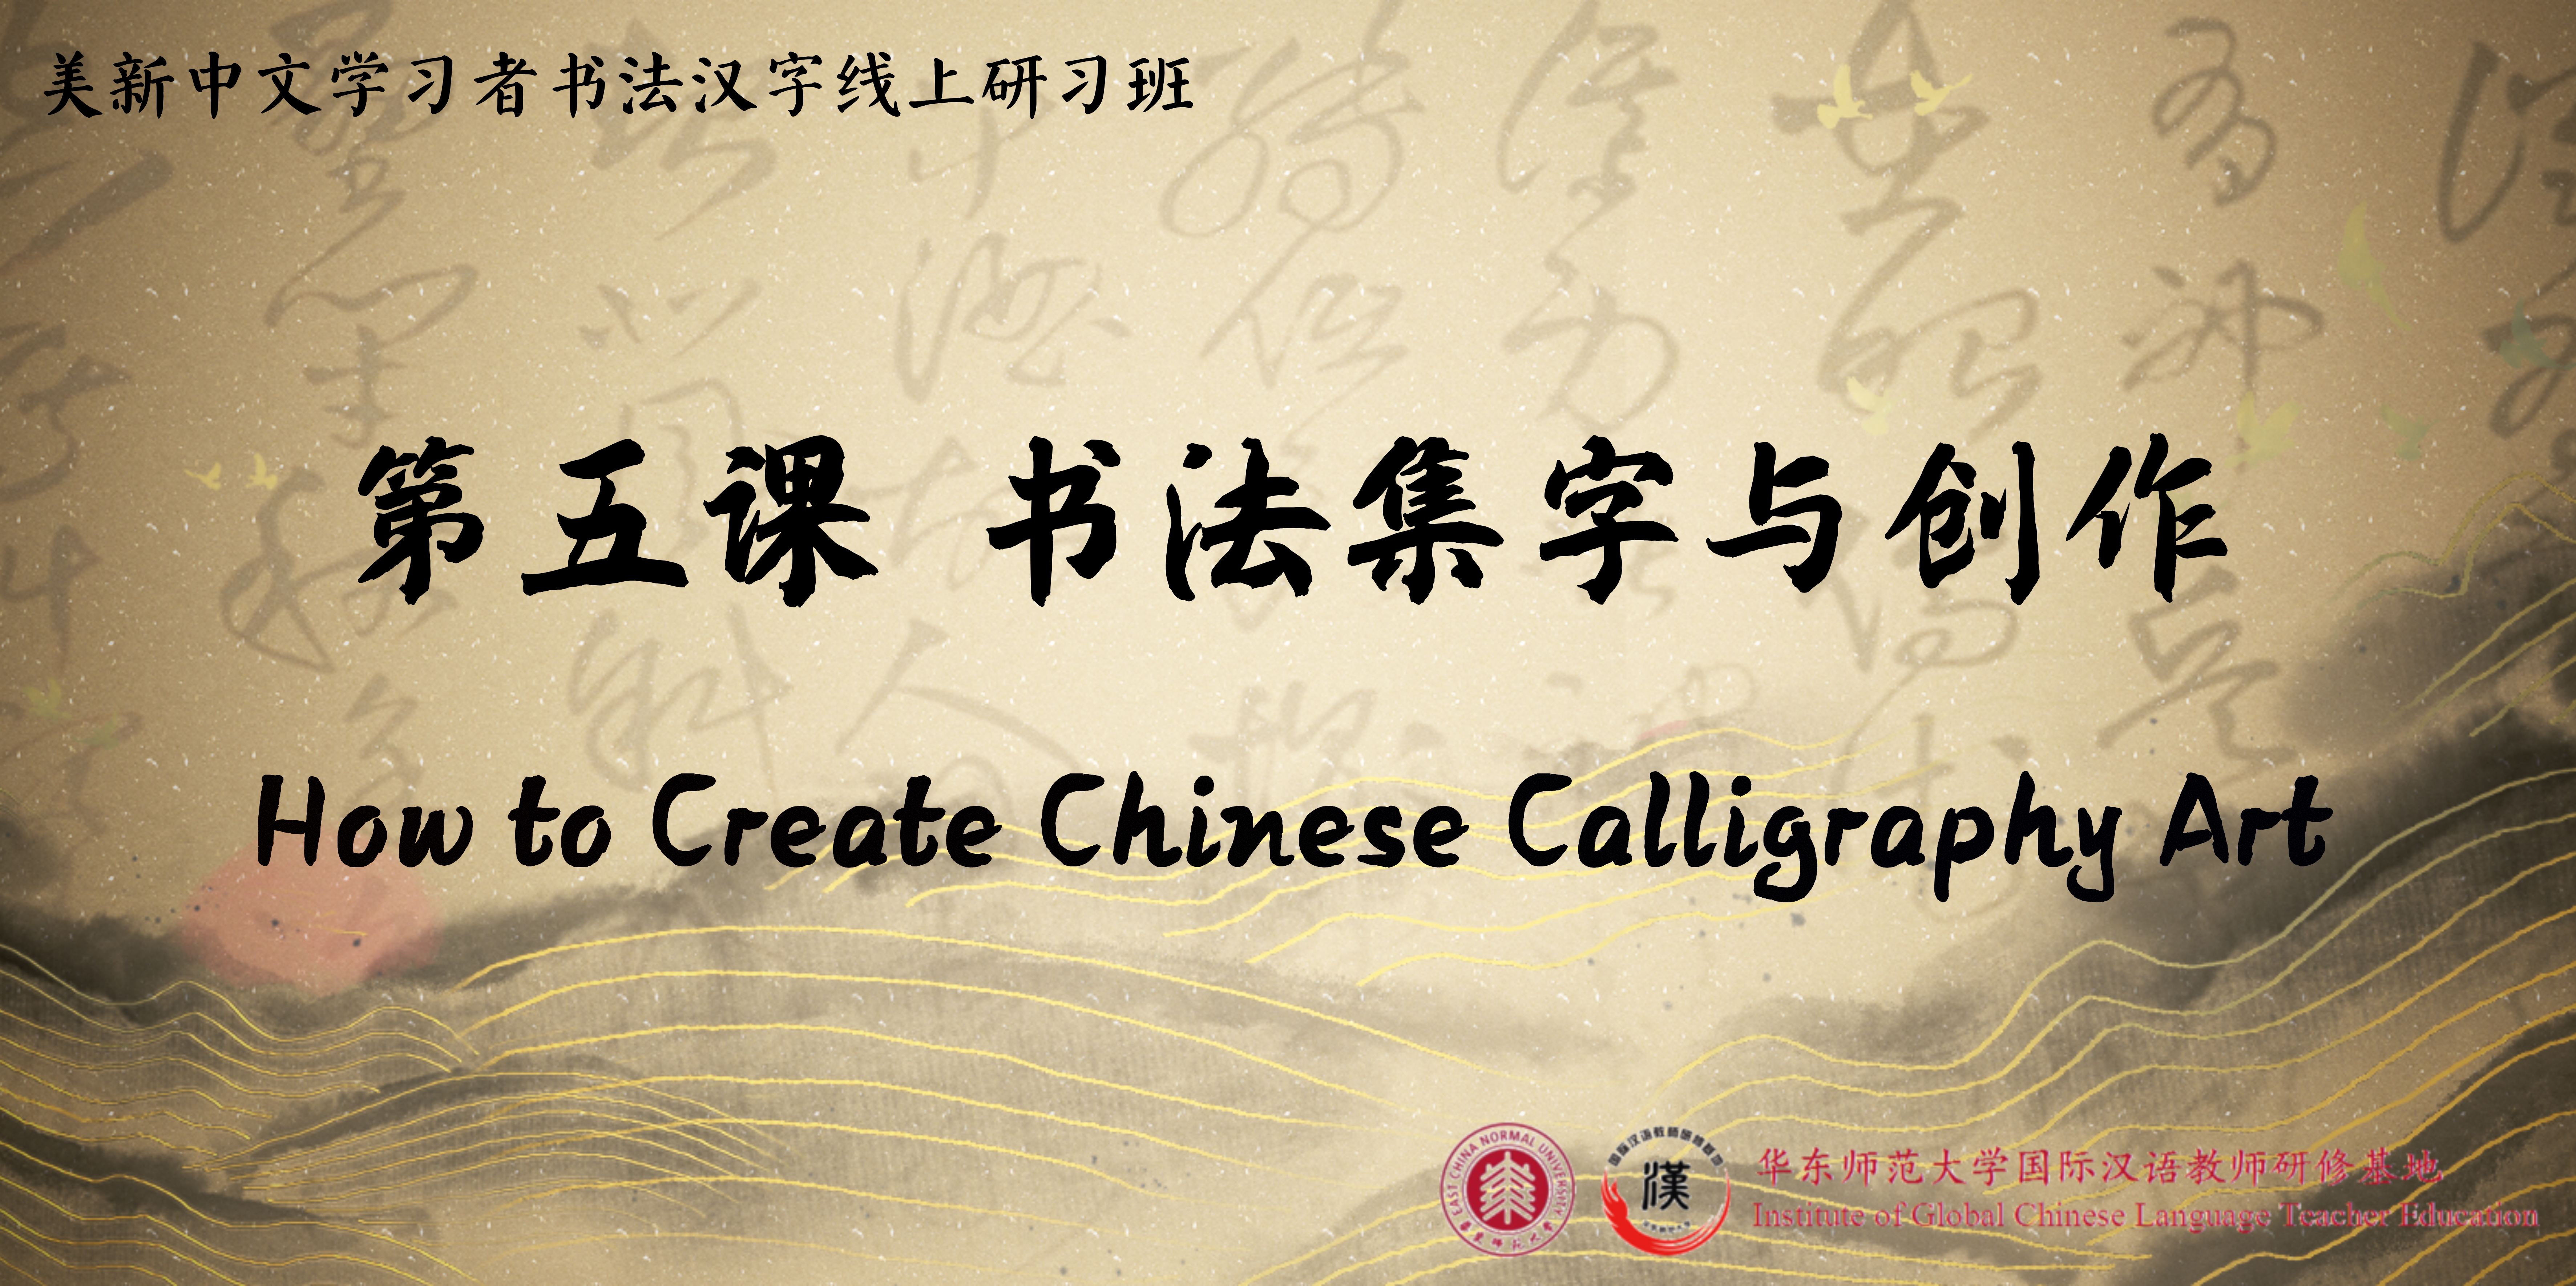 How to Create Chinese Calligraphy Art